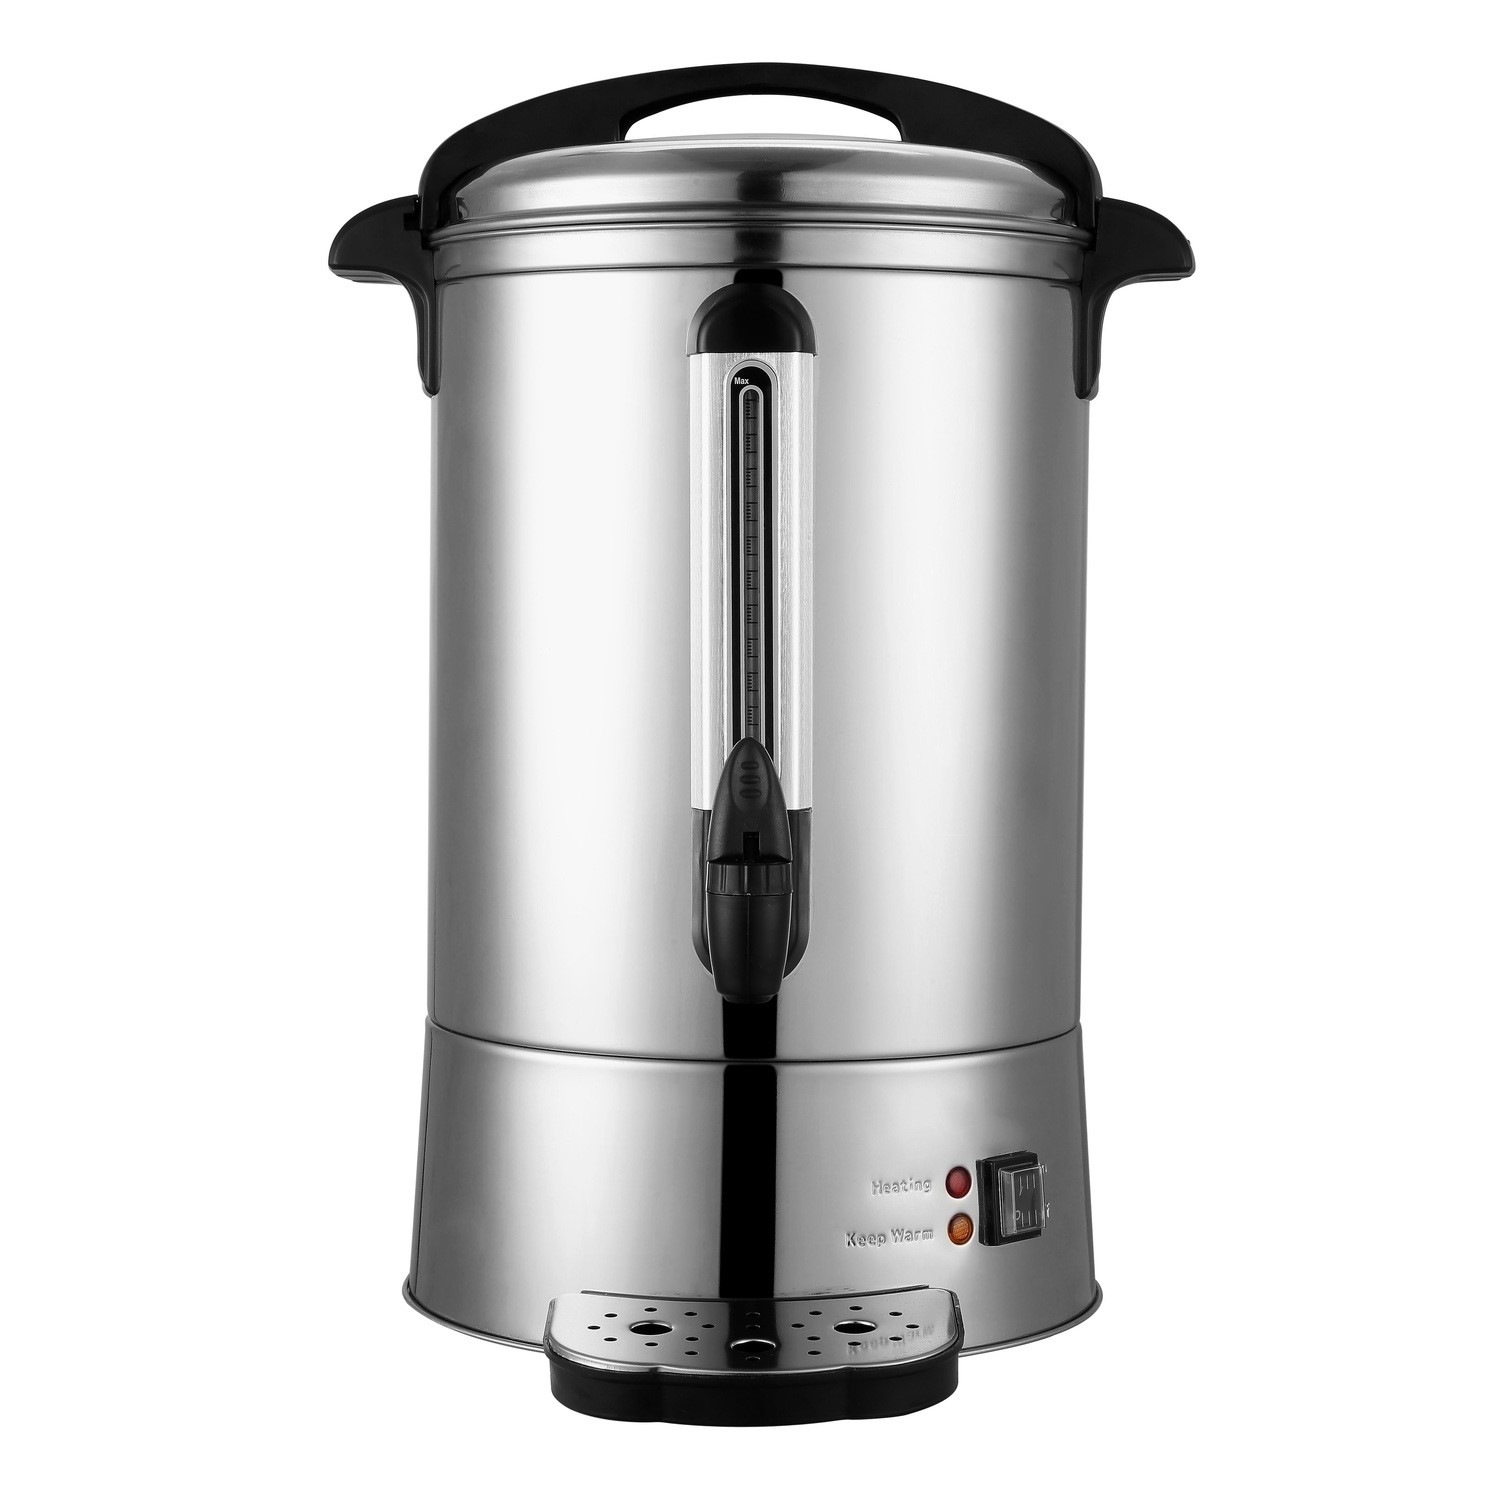 10L Hot Water Urn in Stainless Steel - Tea, Coffee, Boiling Water